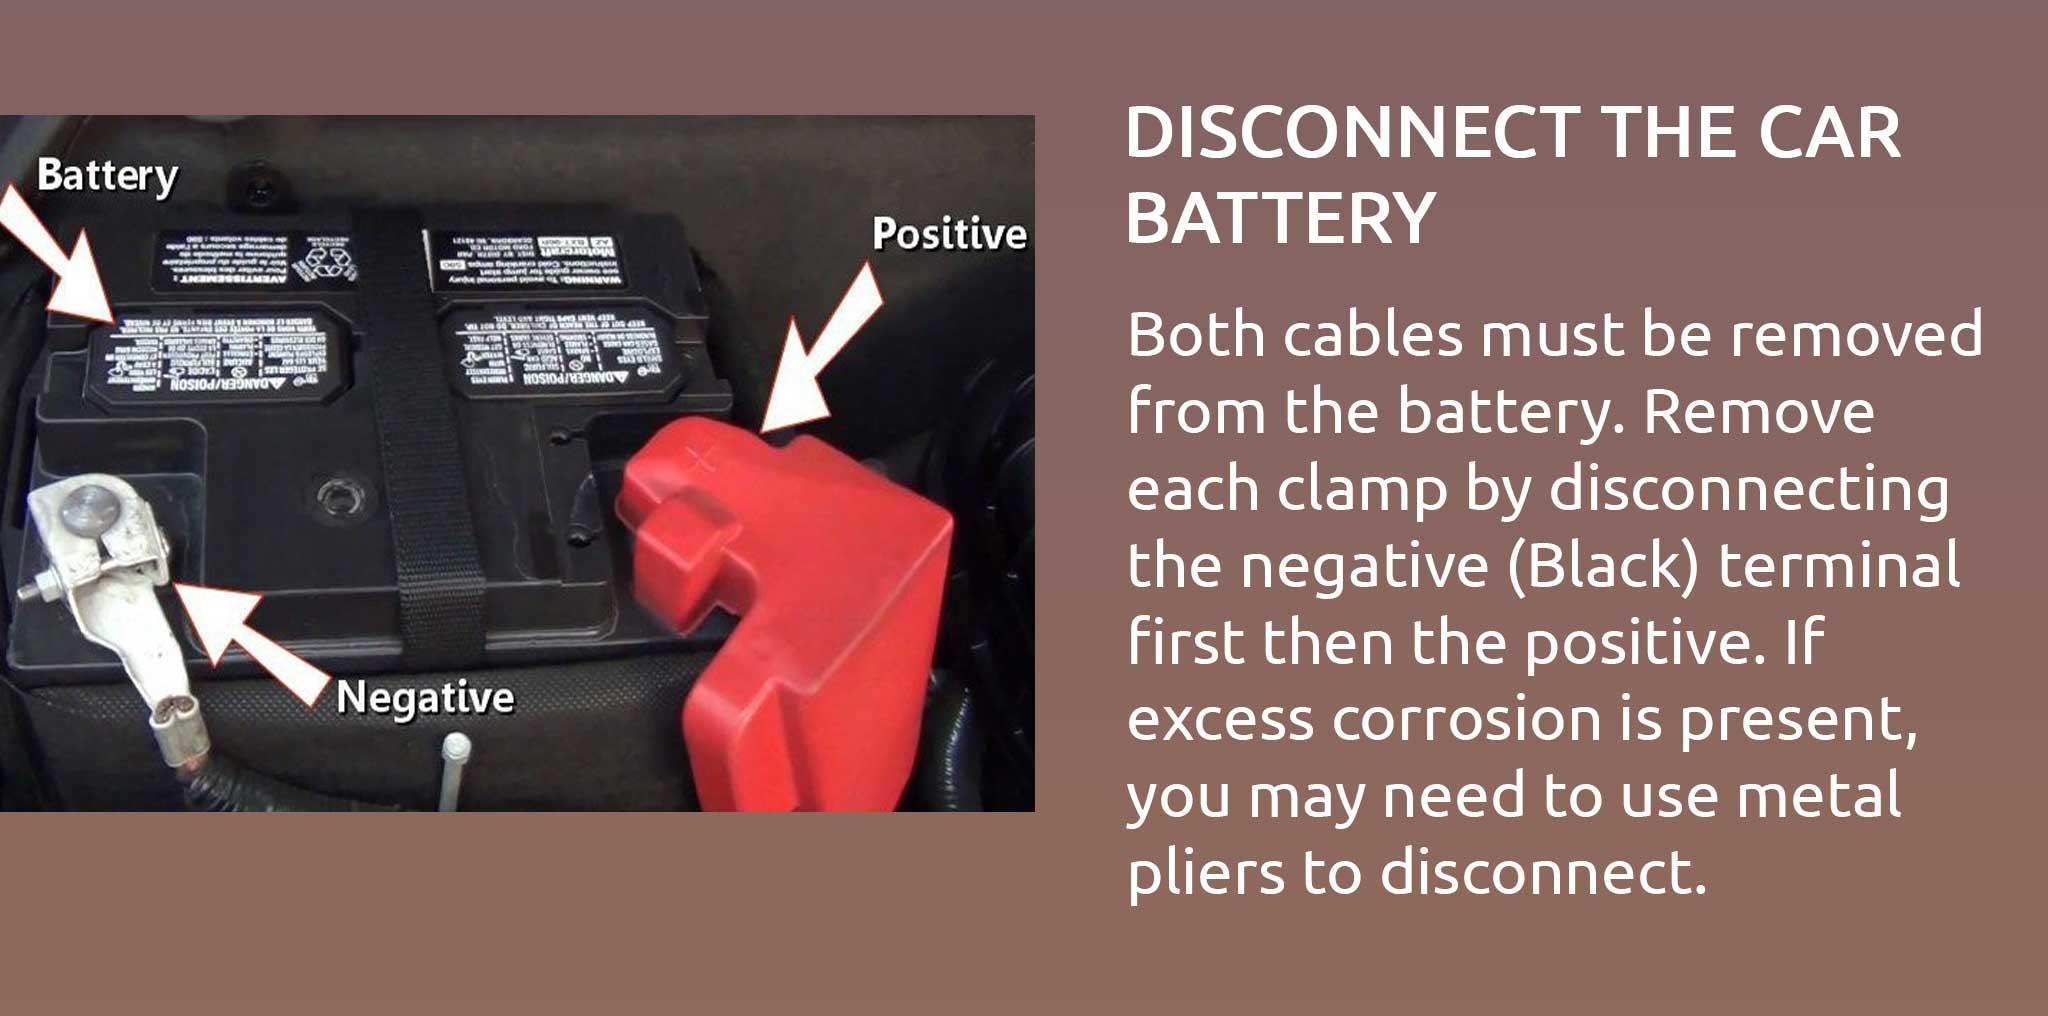 Both cables must be removed from the battery. Remove each clamp by disconnecting the negative (Black) terminal first then the positive. If excess corrosion is present, you may need to use metal pliers to disconnect.